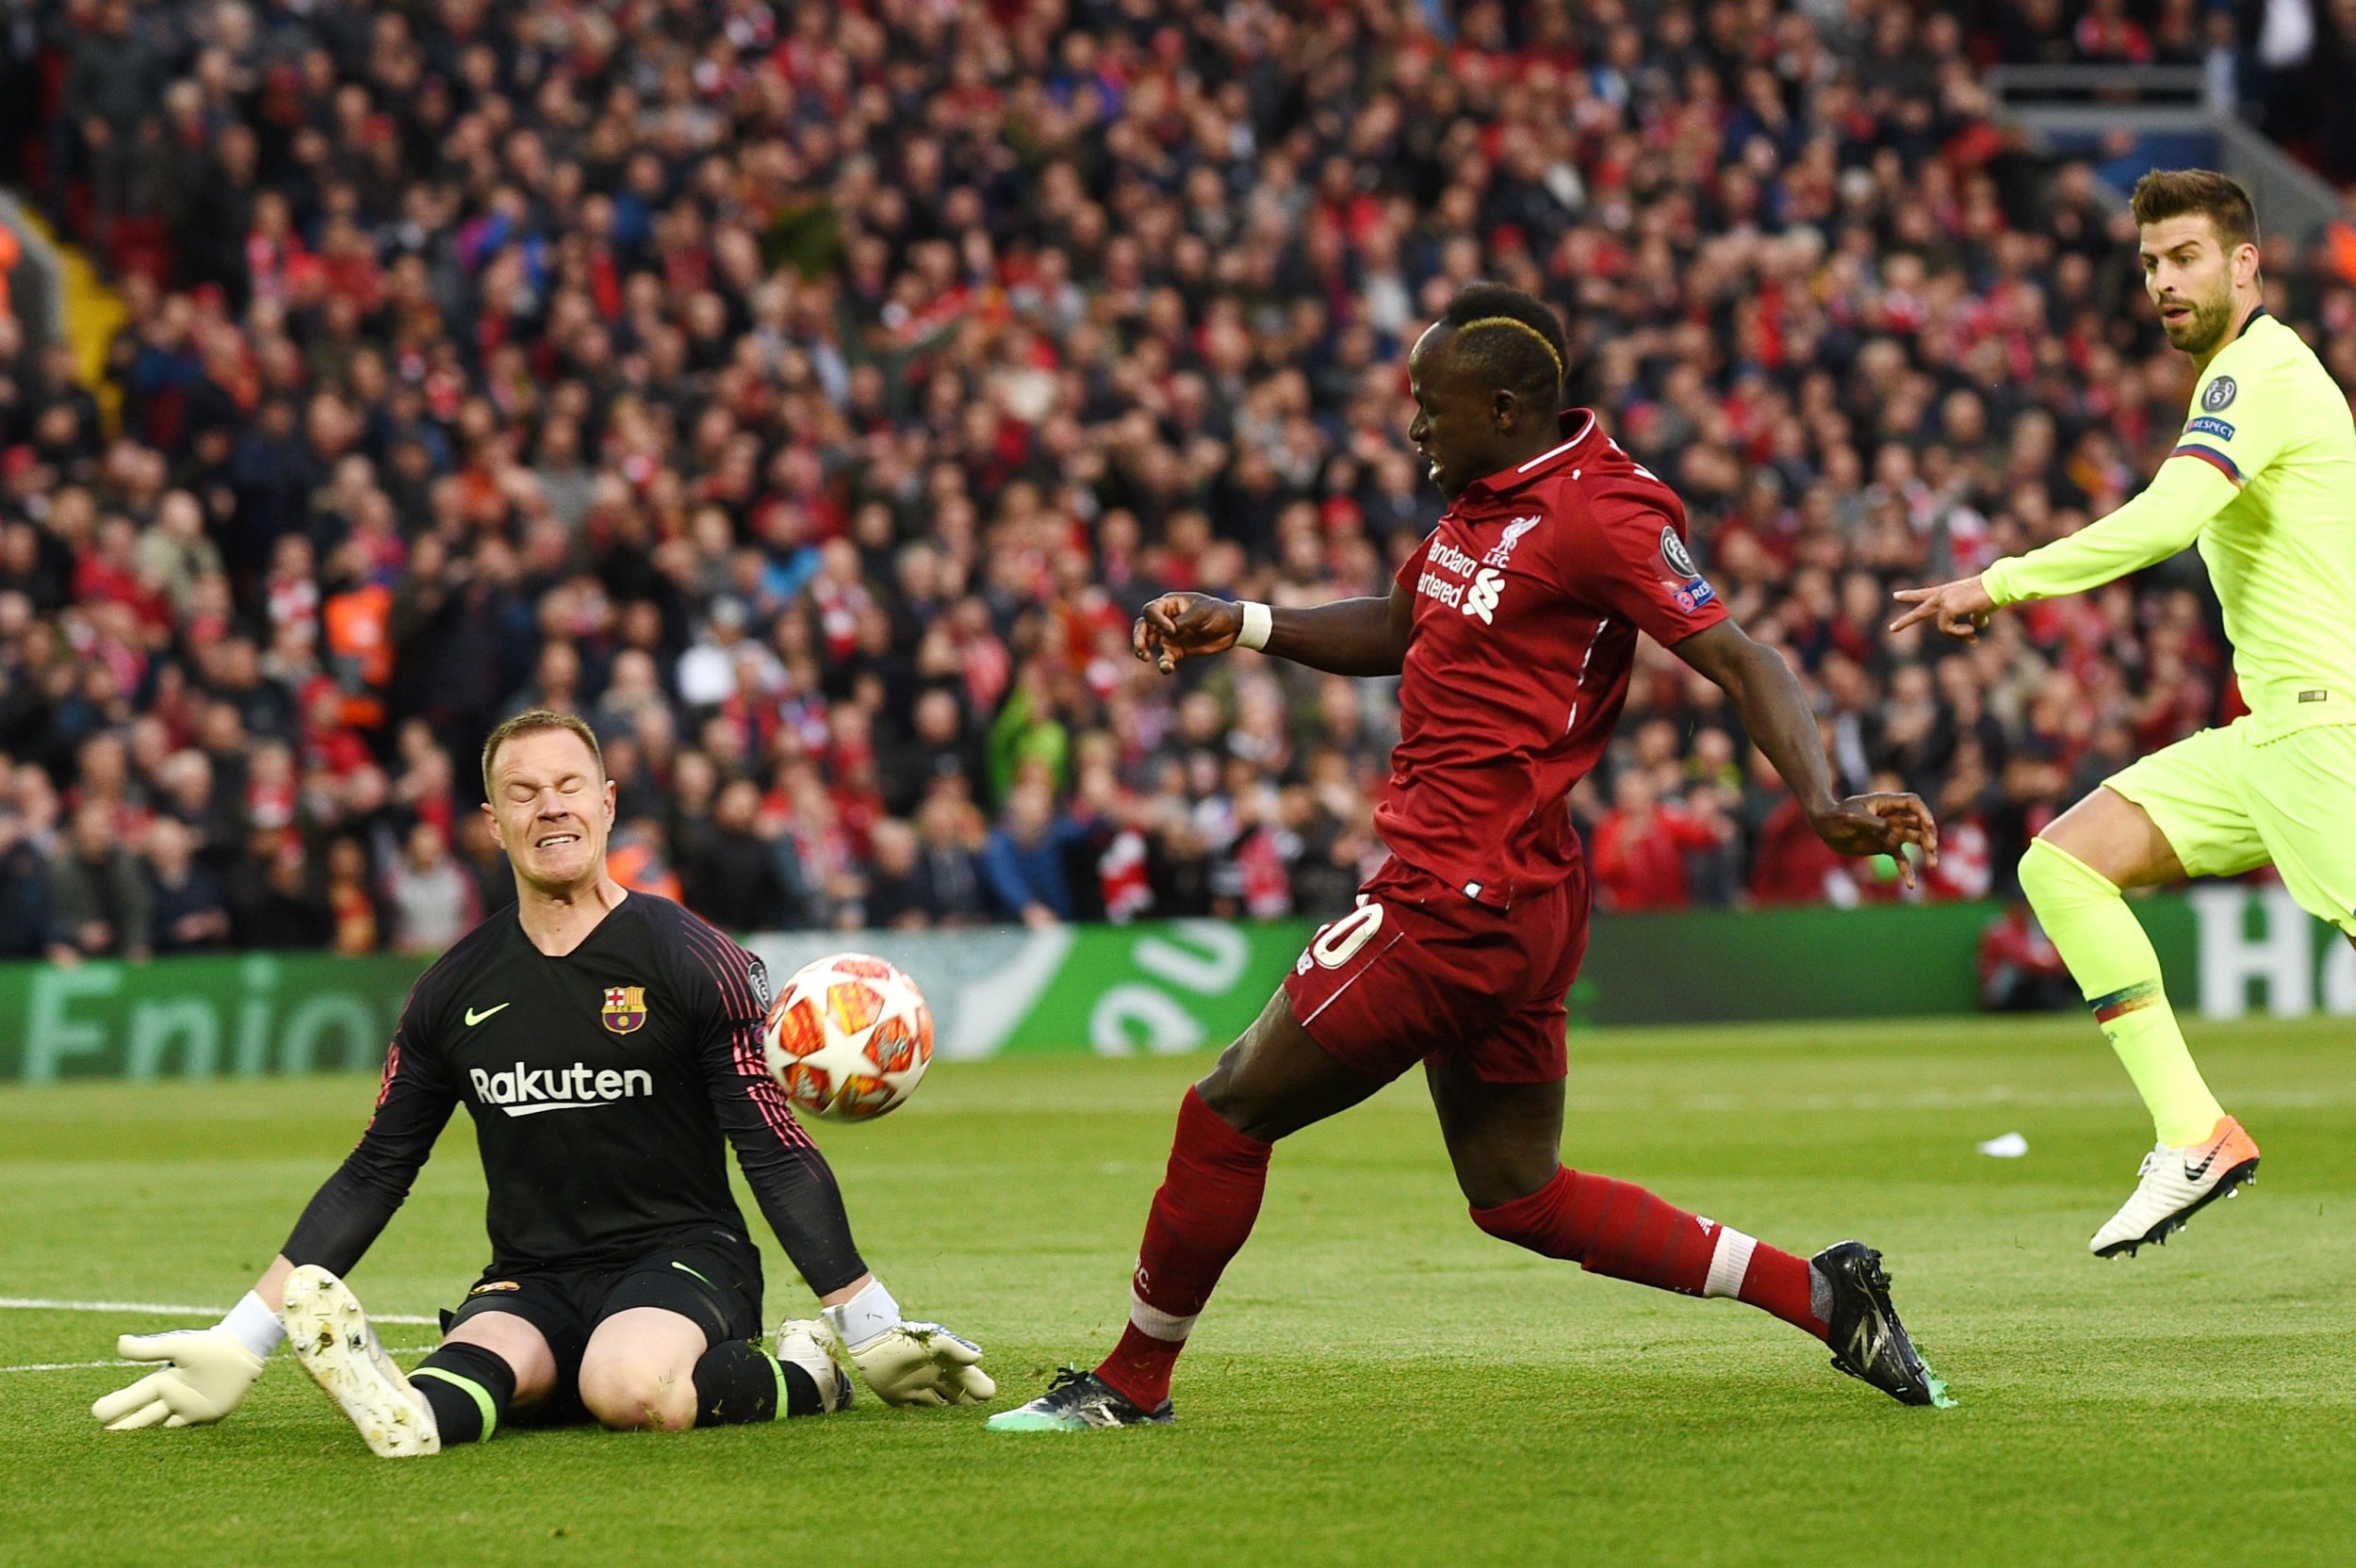 Liverpool vs Barcelona: Divock Origi hoping to play his part in one